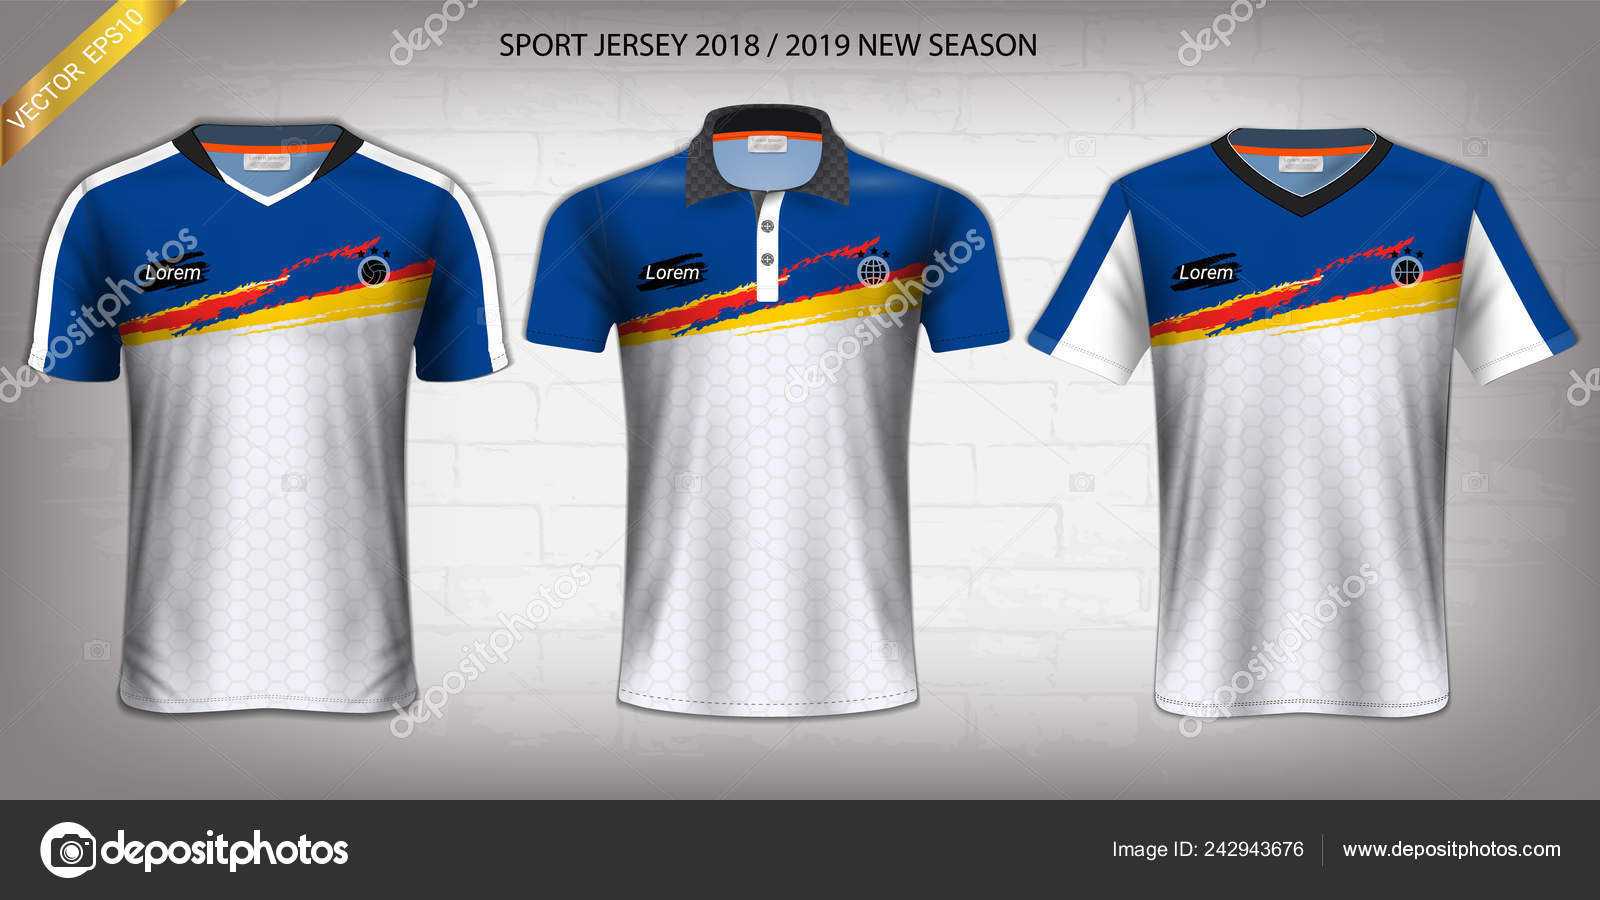 Download Soccer Jersey Shirt Sport Mockup Template Graphic Design Activewear Uniforms Vector Image By C Aioonrak Gmail Com Vector Stock 242943676